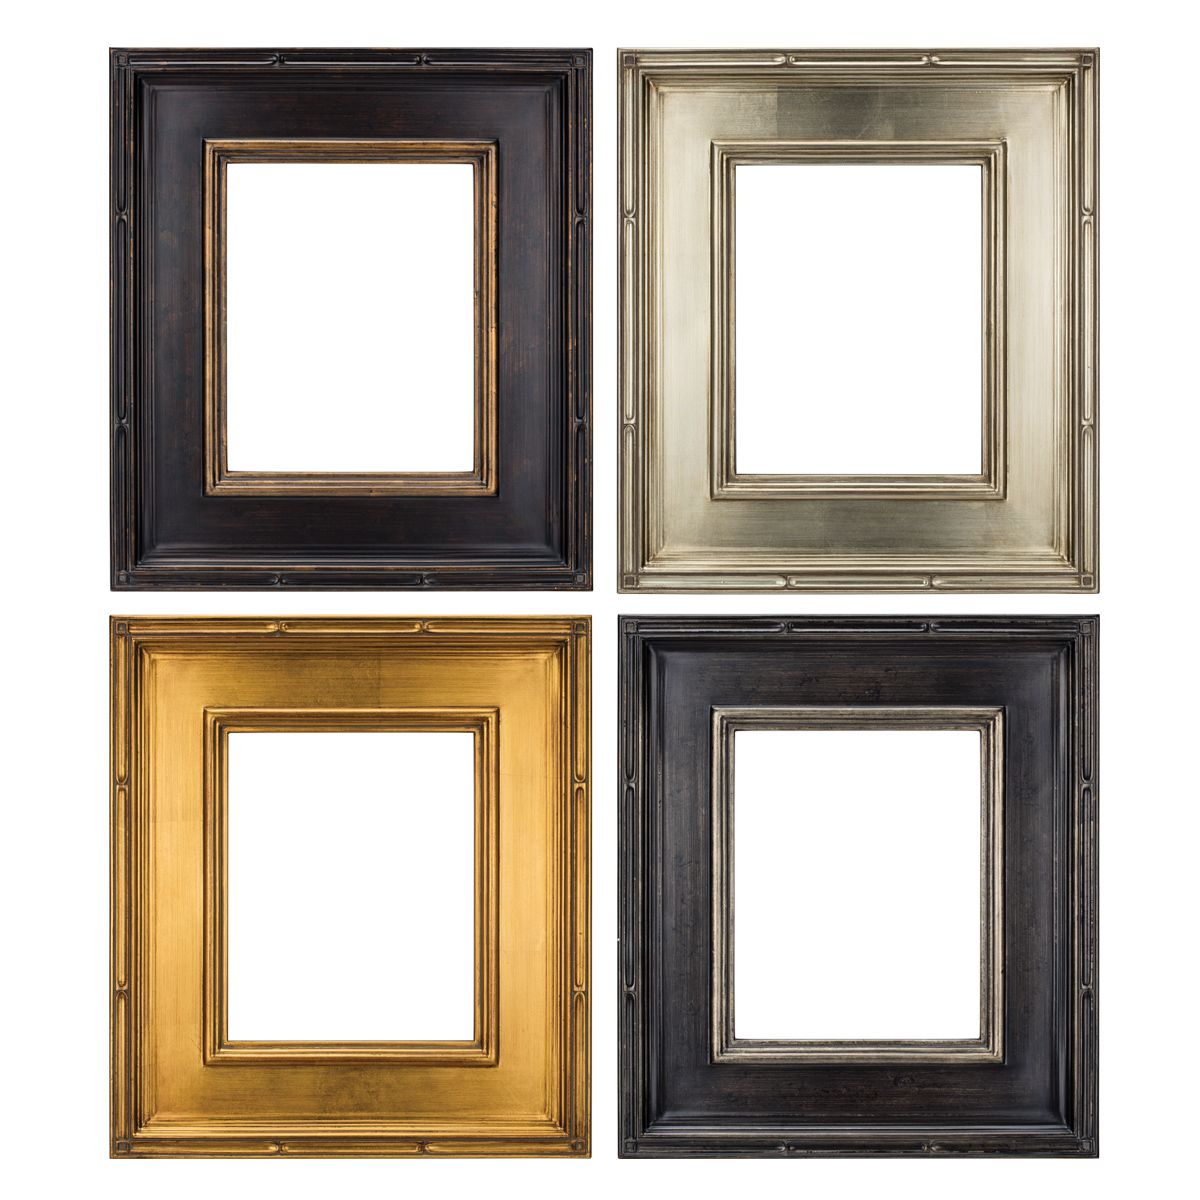 Four distinct and luxurious finishes